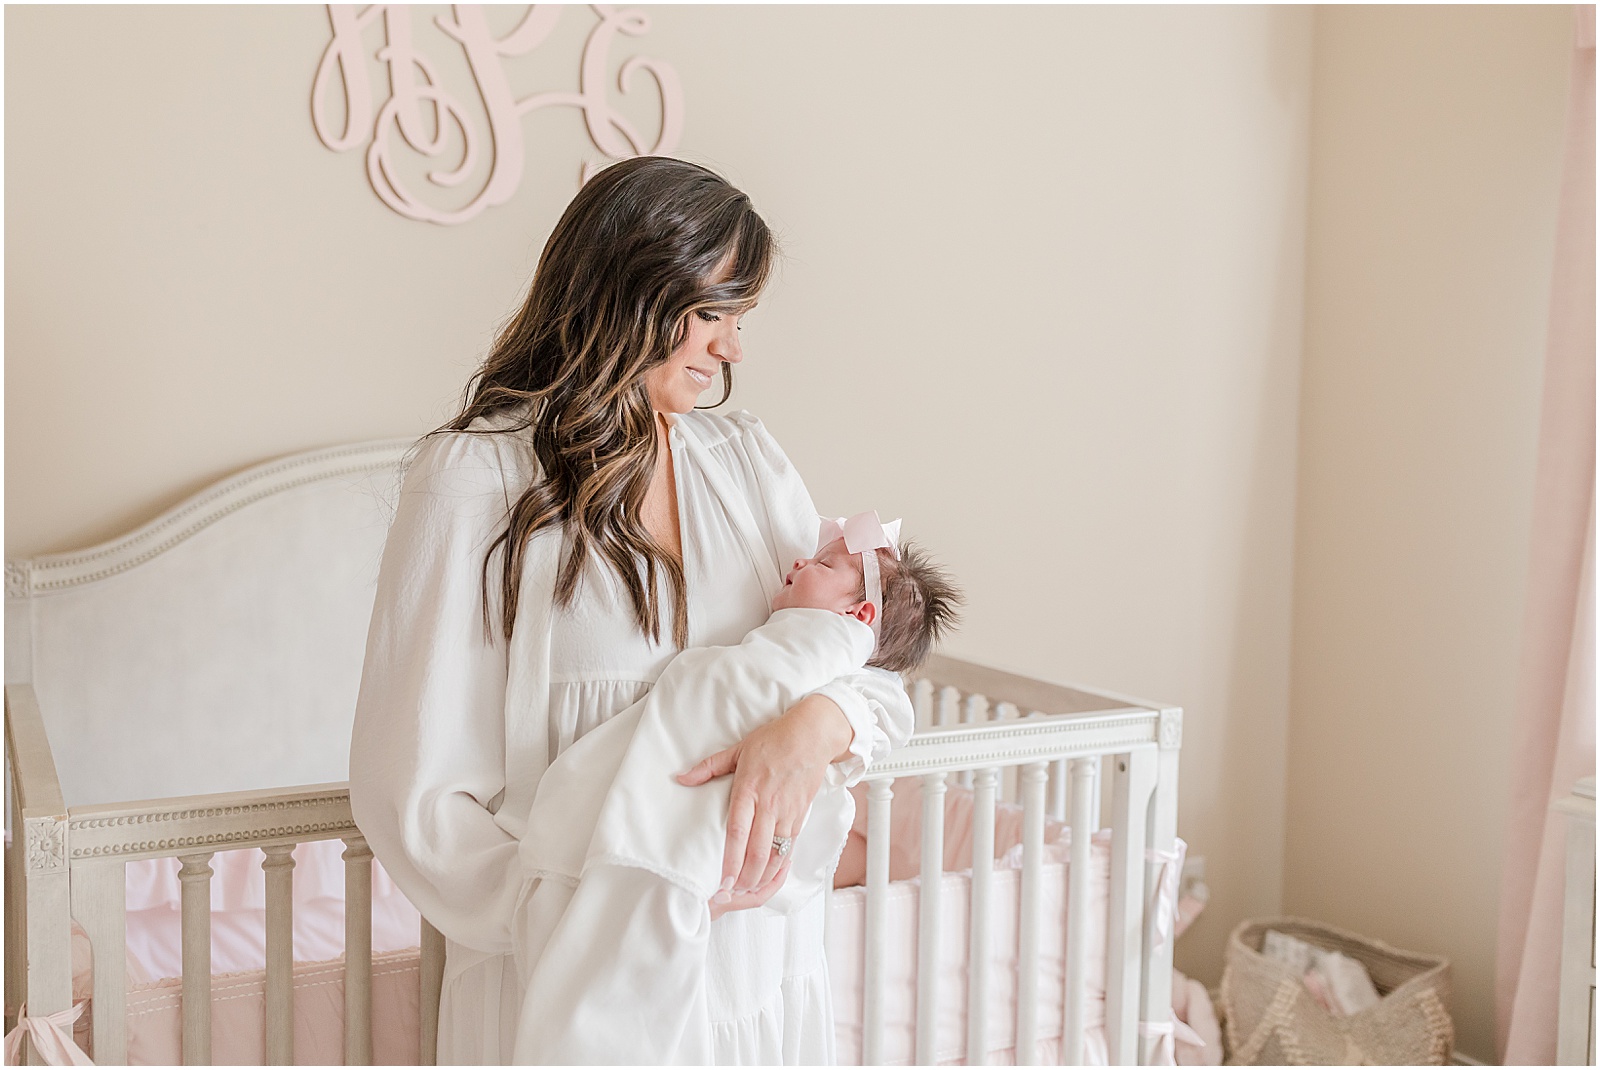 Portrait of mother gazing down at newborn baby standing in front of a white crib by Greenville photographer Molly Hensley